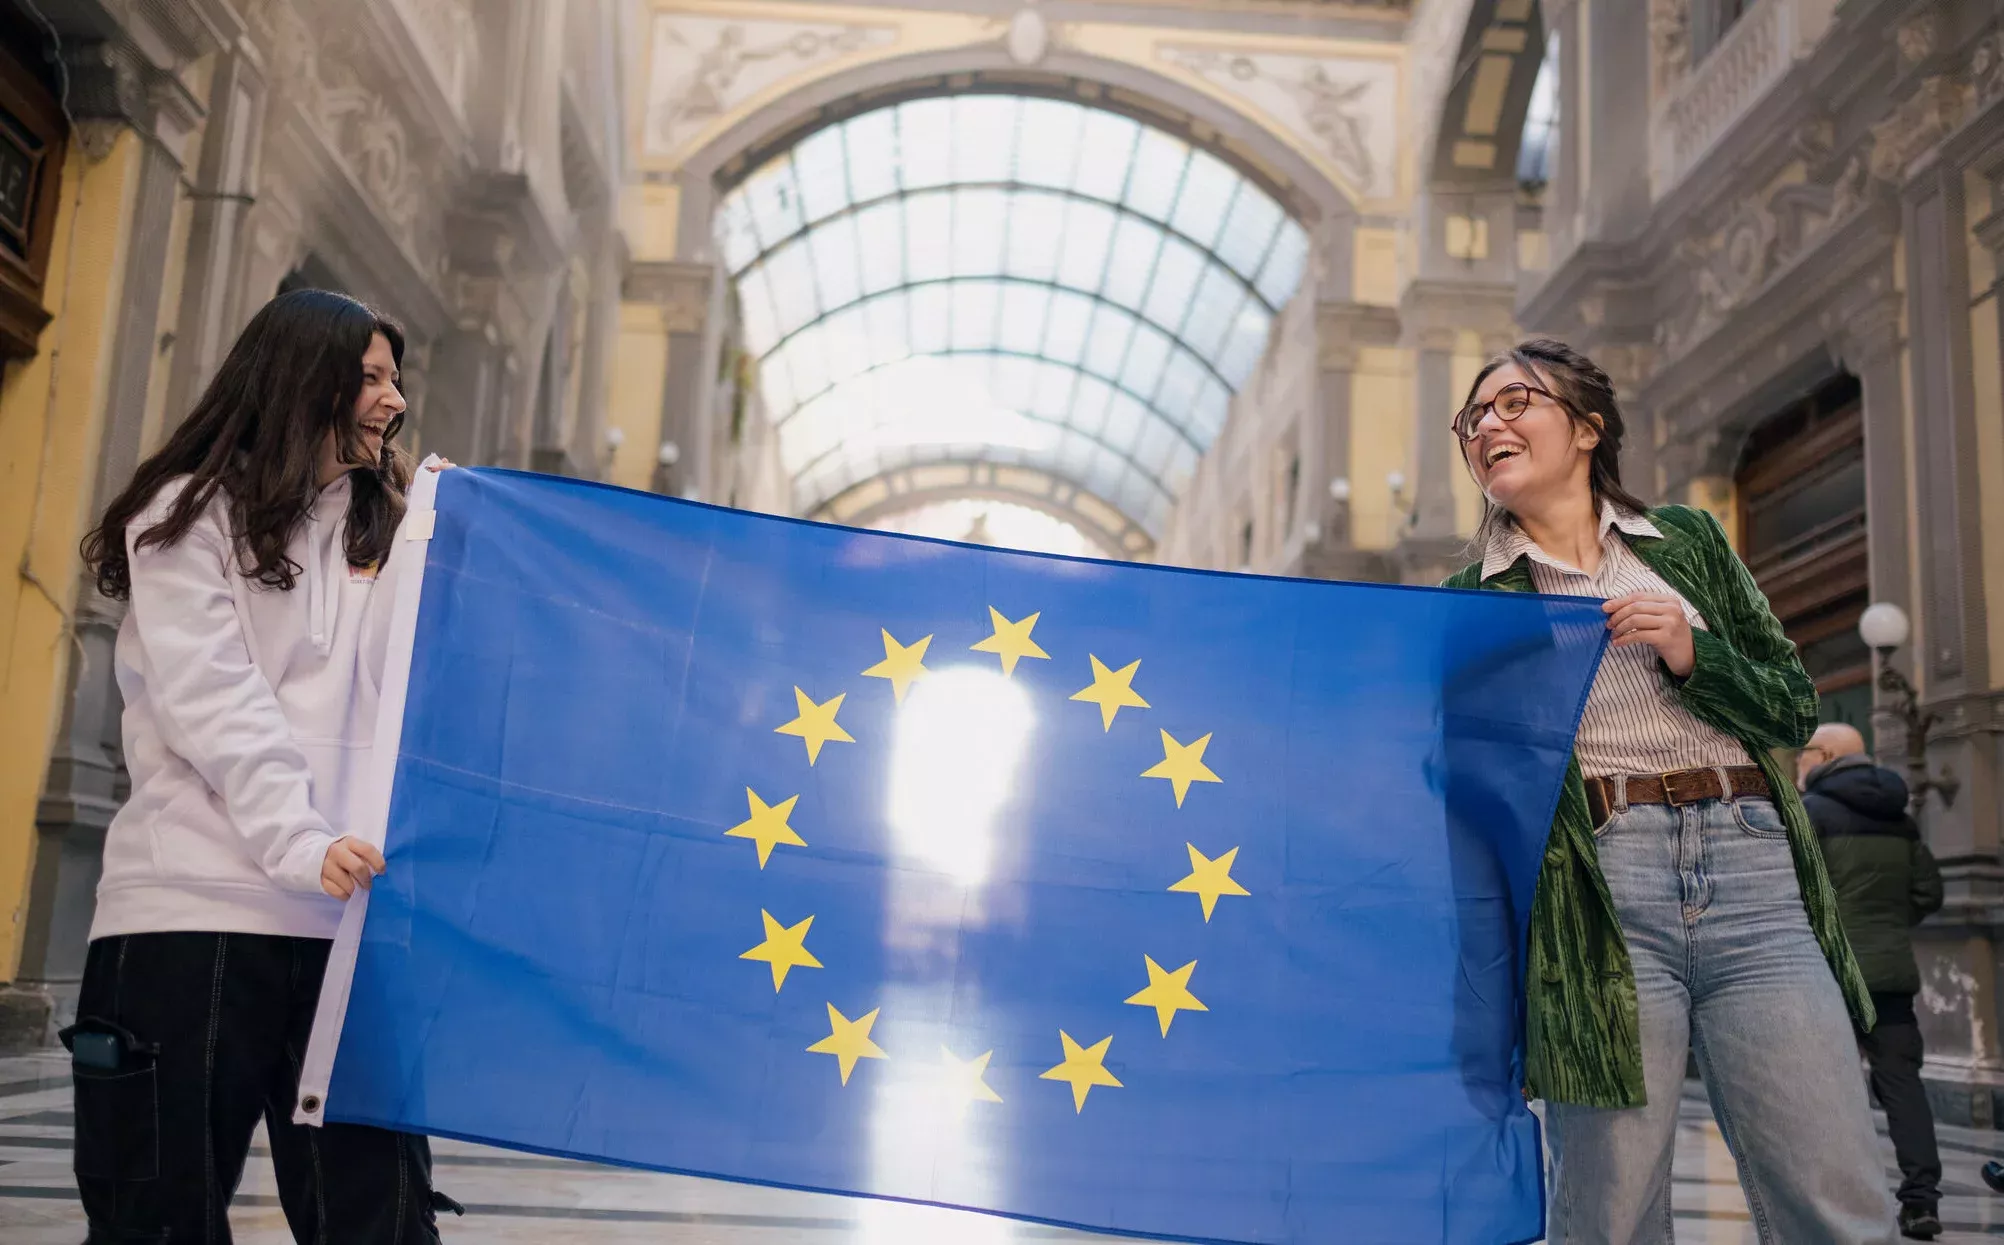 Apply for Executive Master in EU Studies programme at the European Institute